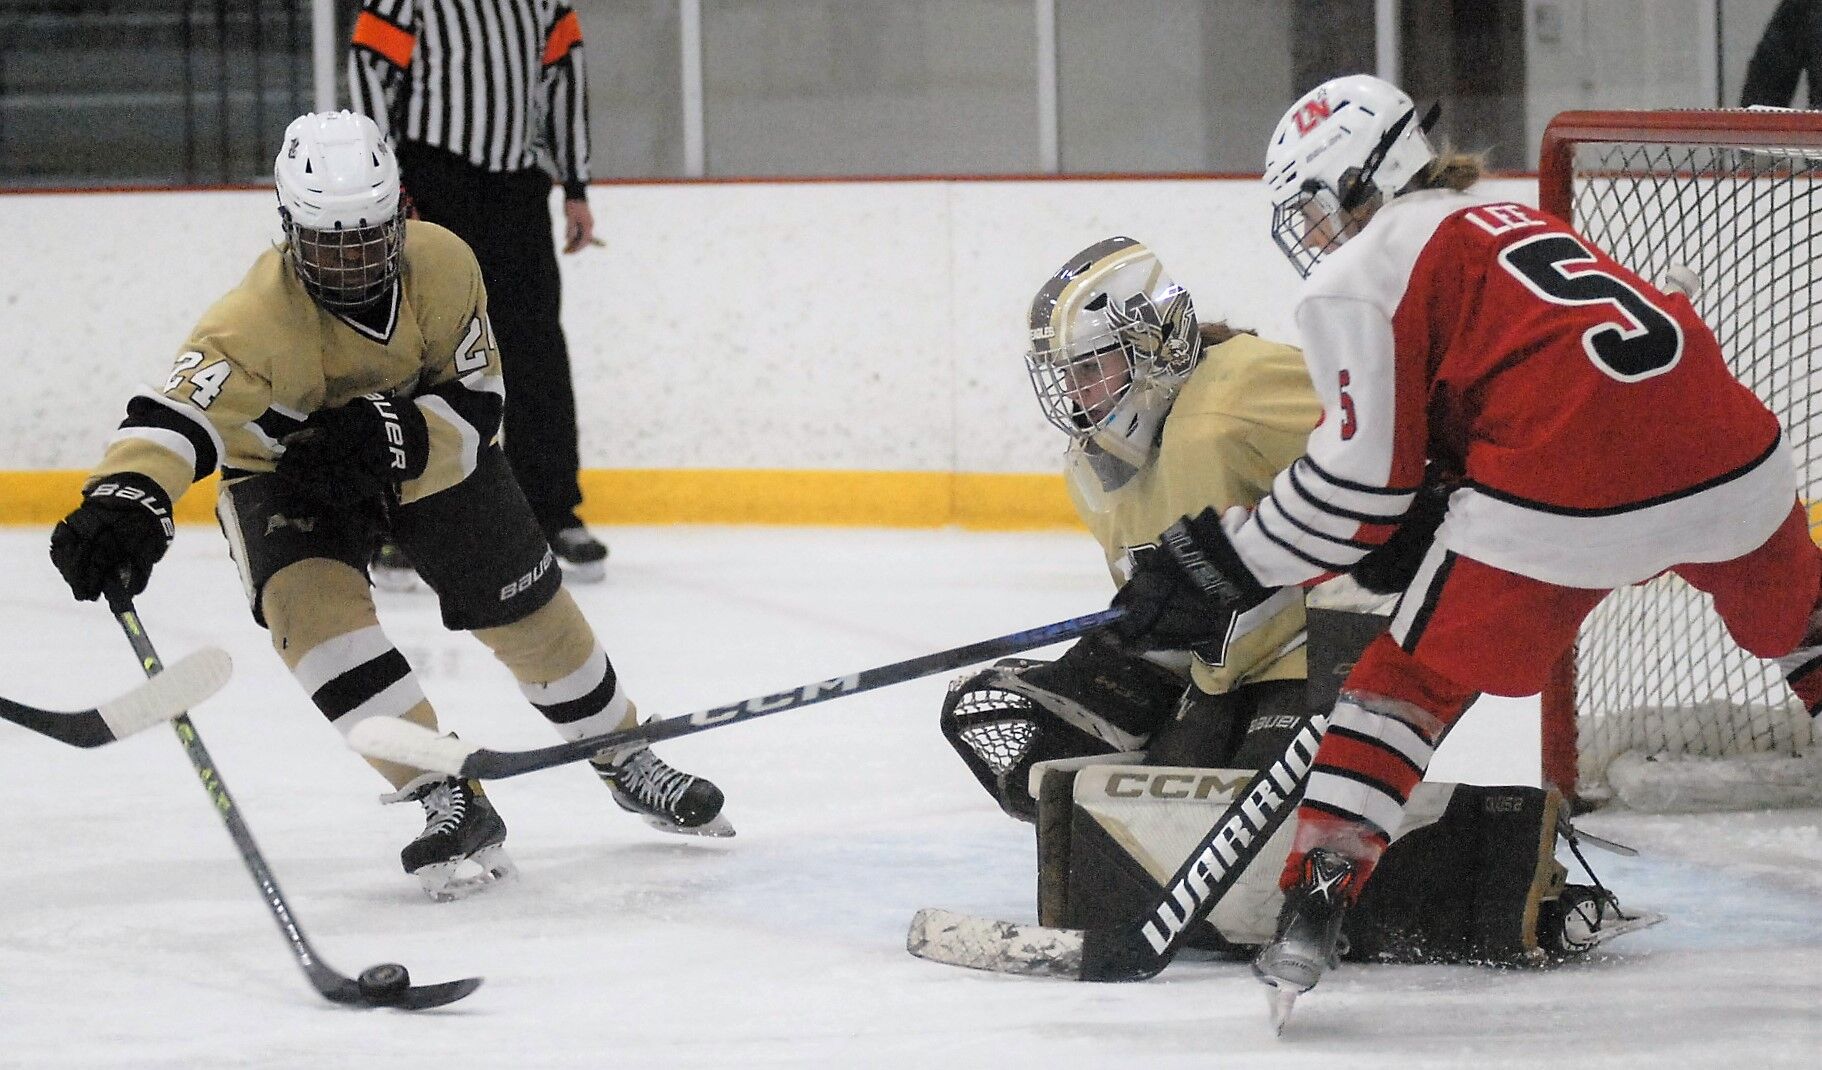 North gets top seed in Section 3AA girls hockey